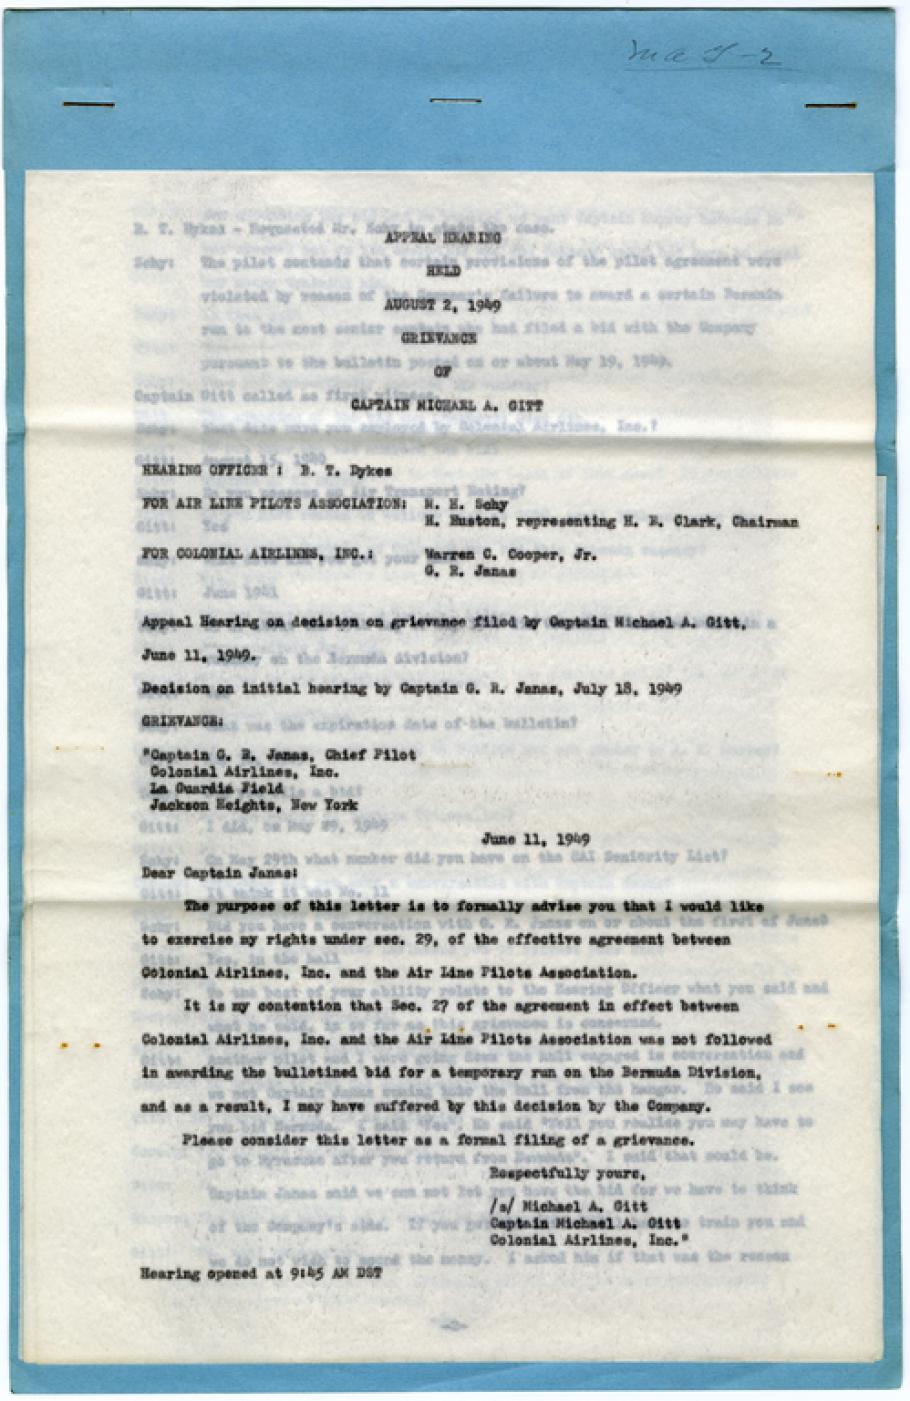 Page of typewritten text on onionskin on blue paper background